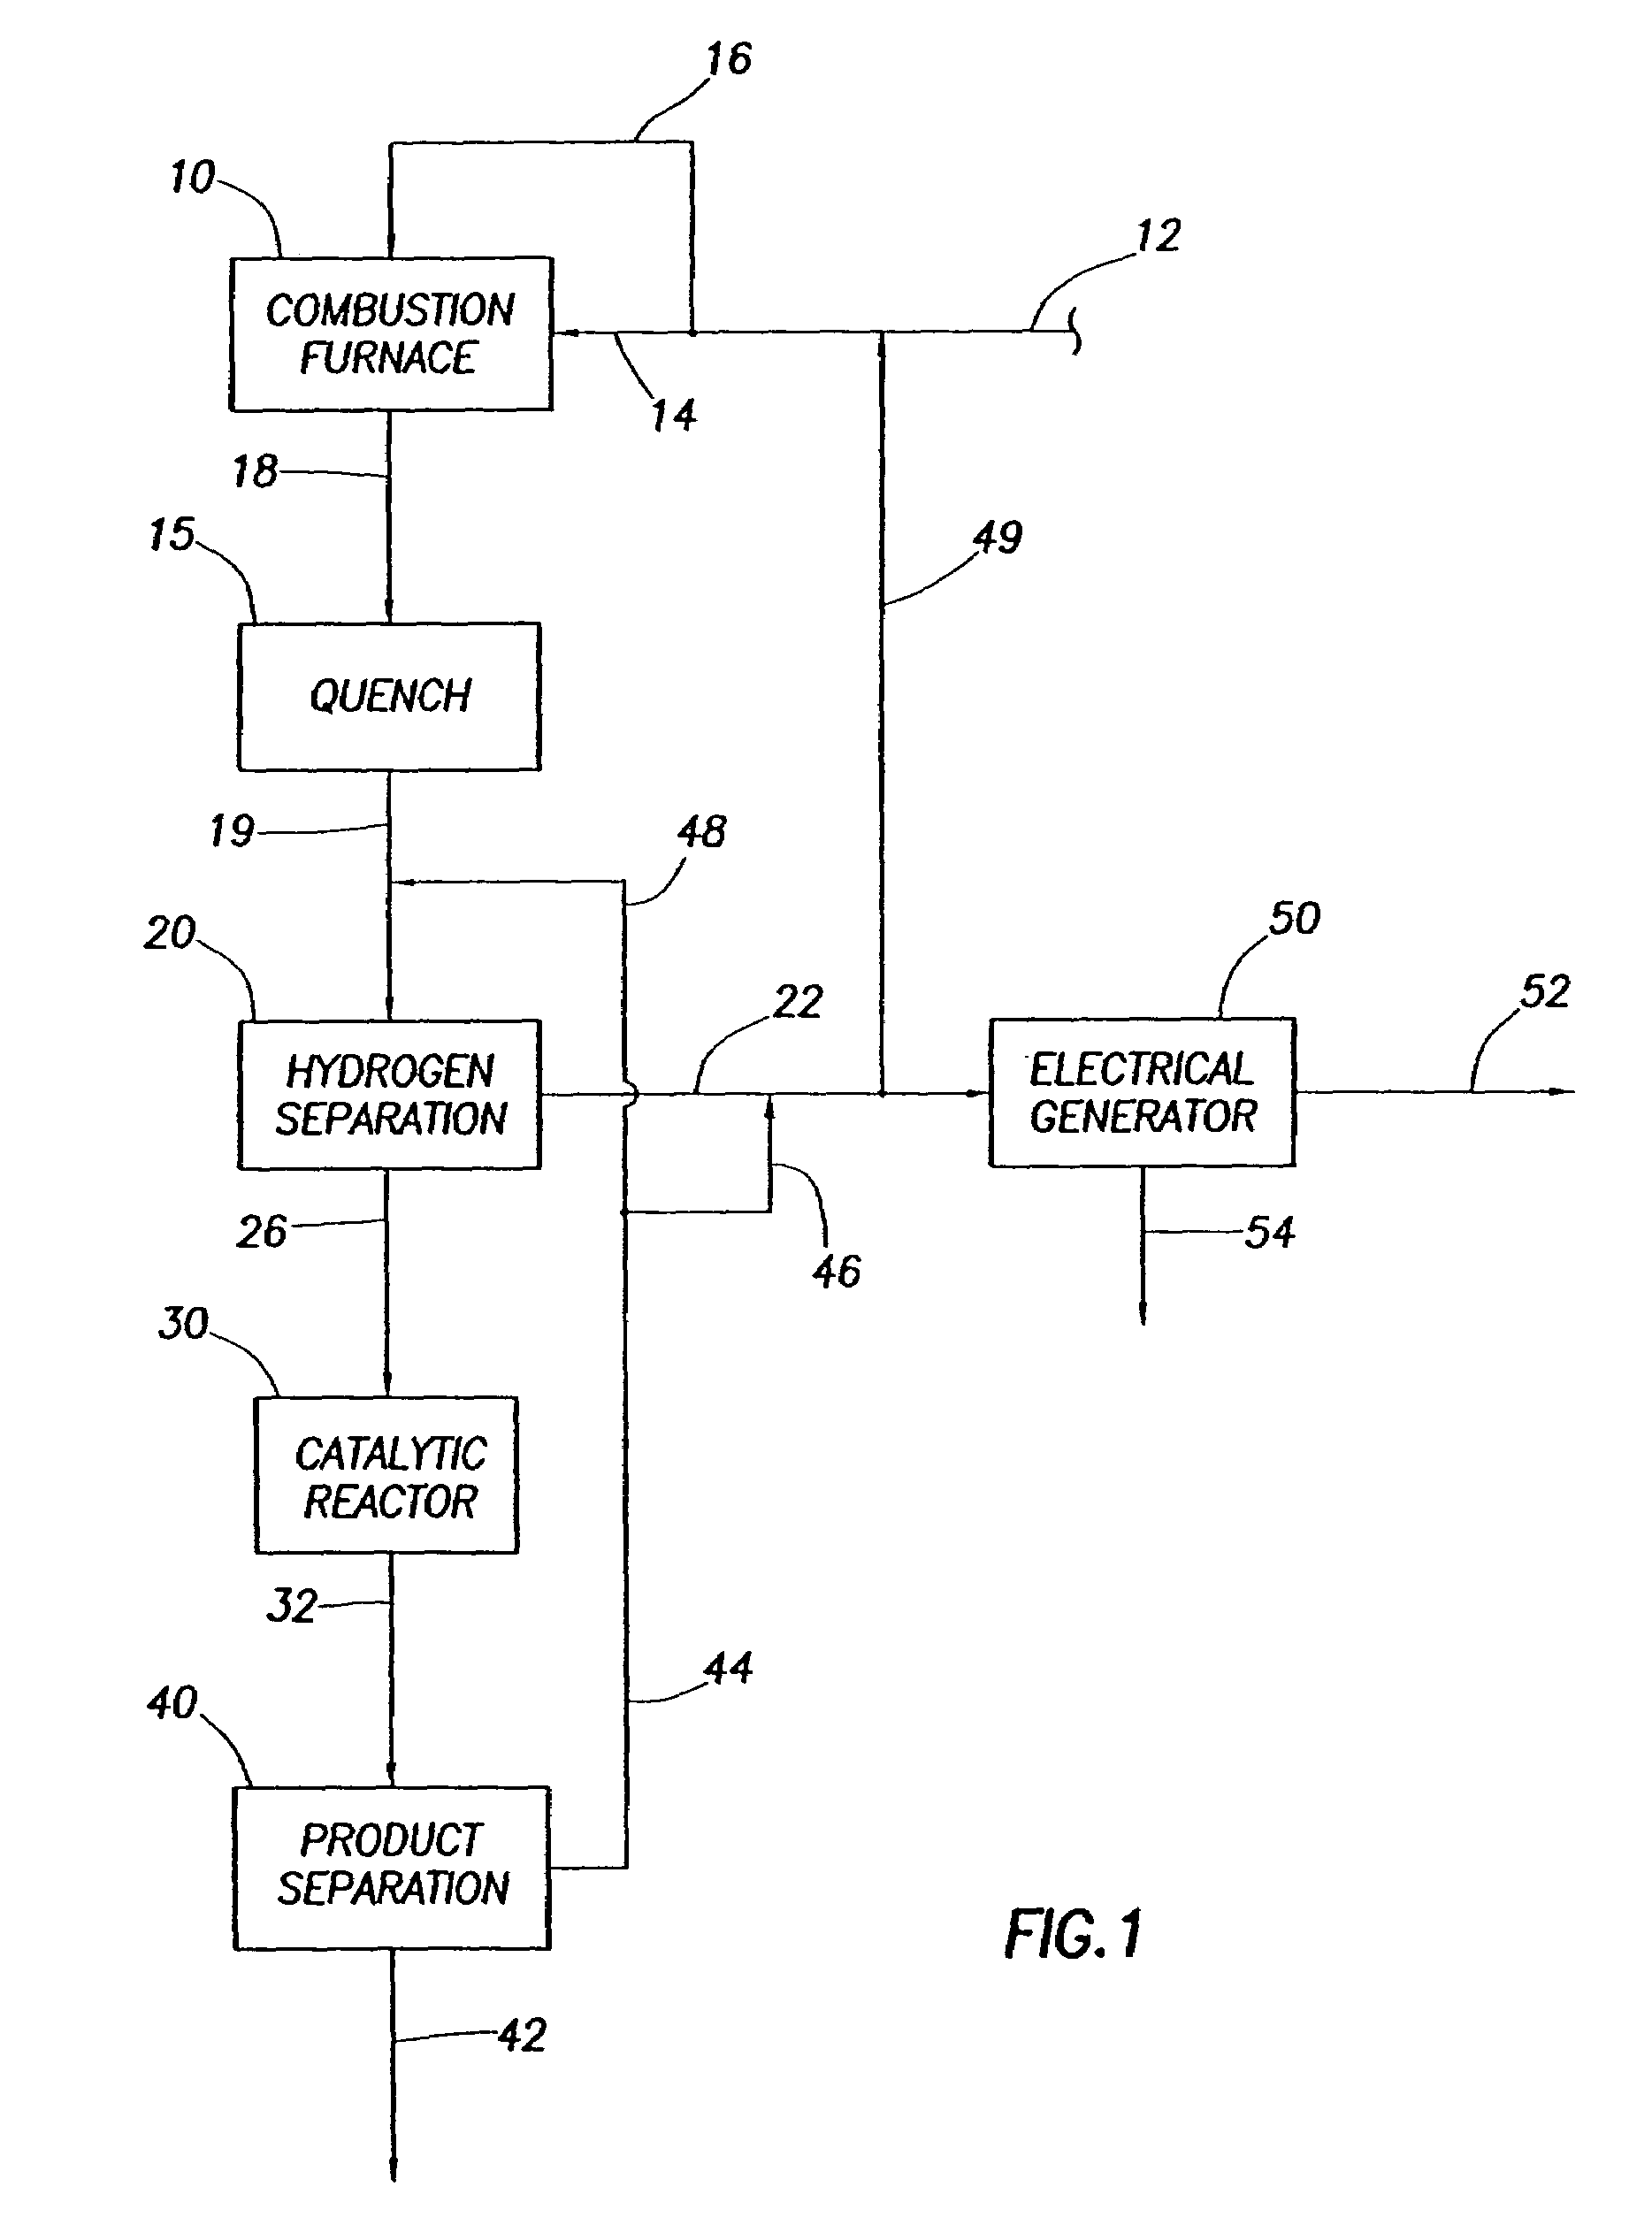 Method for converting natural gas to olefins